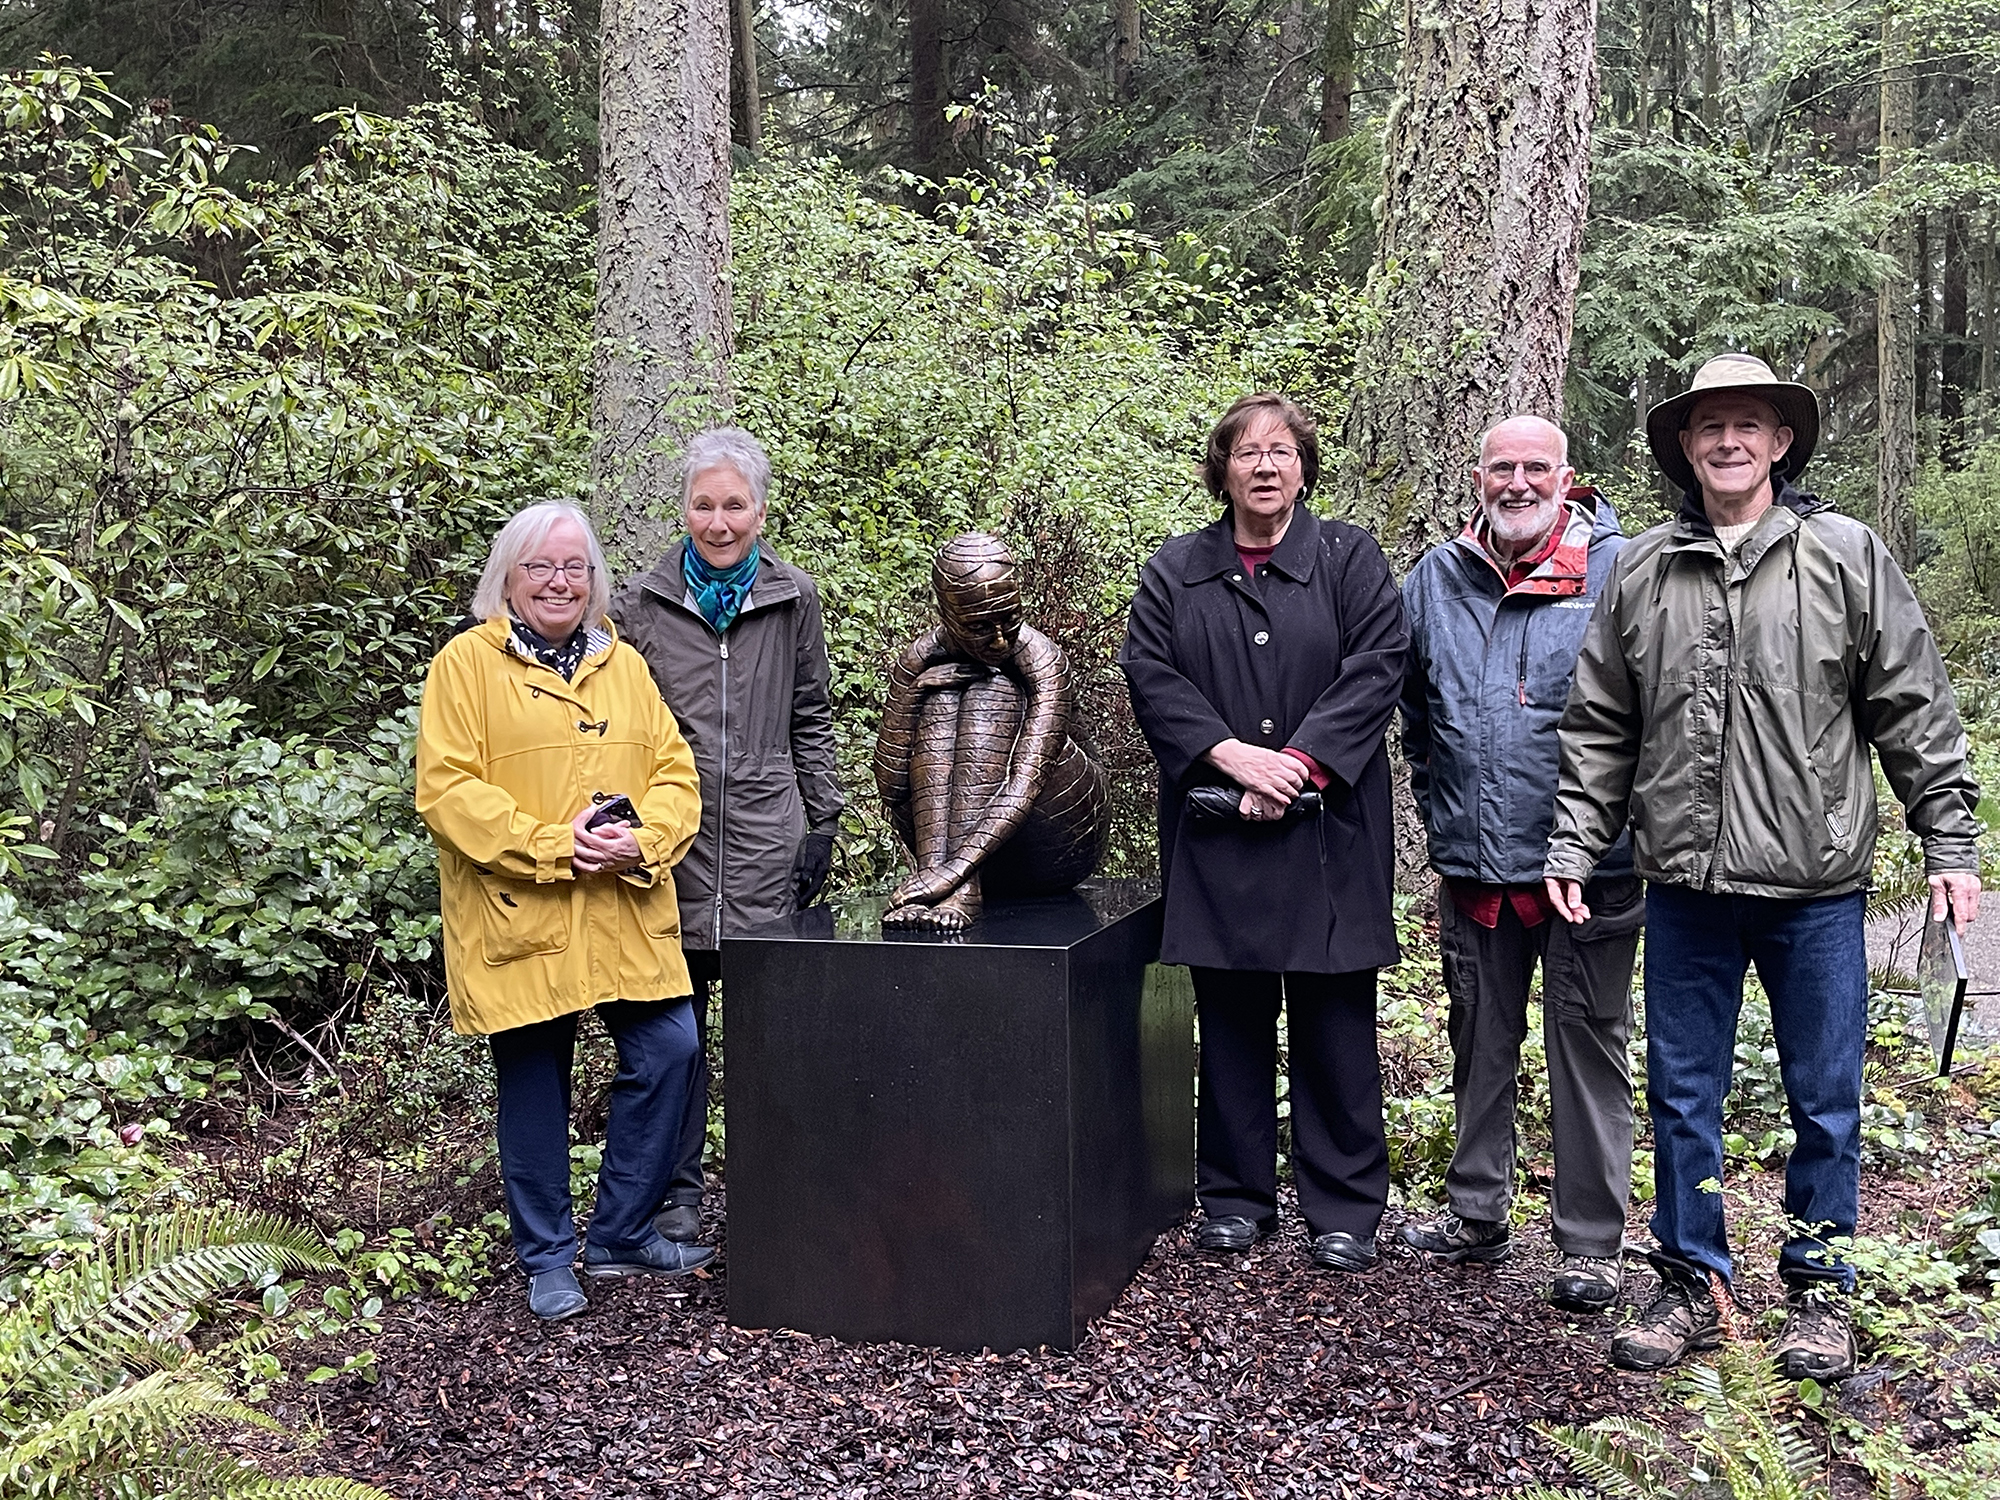 Lynda, Maria, Molly, Ken, Scott at unveiling of Anillos at Price Sculpture Forest